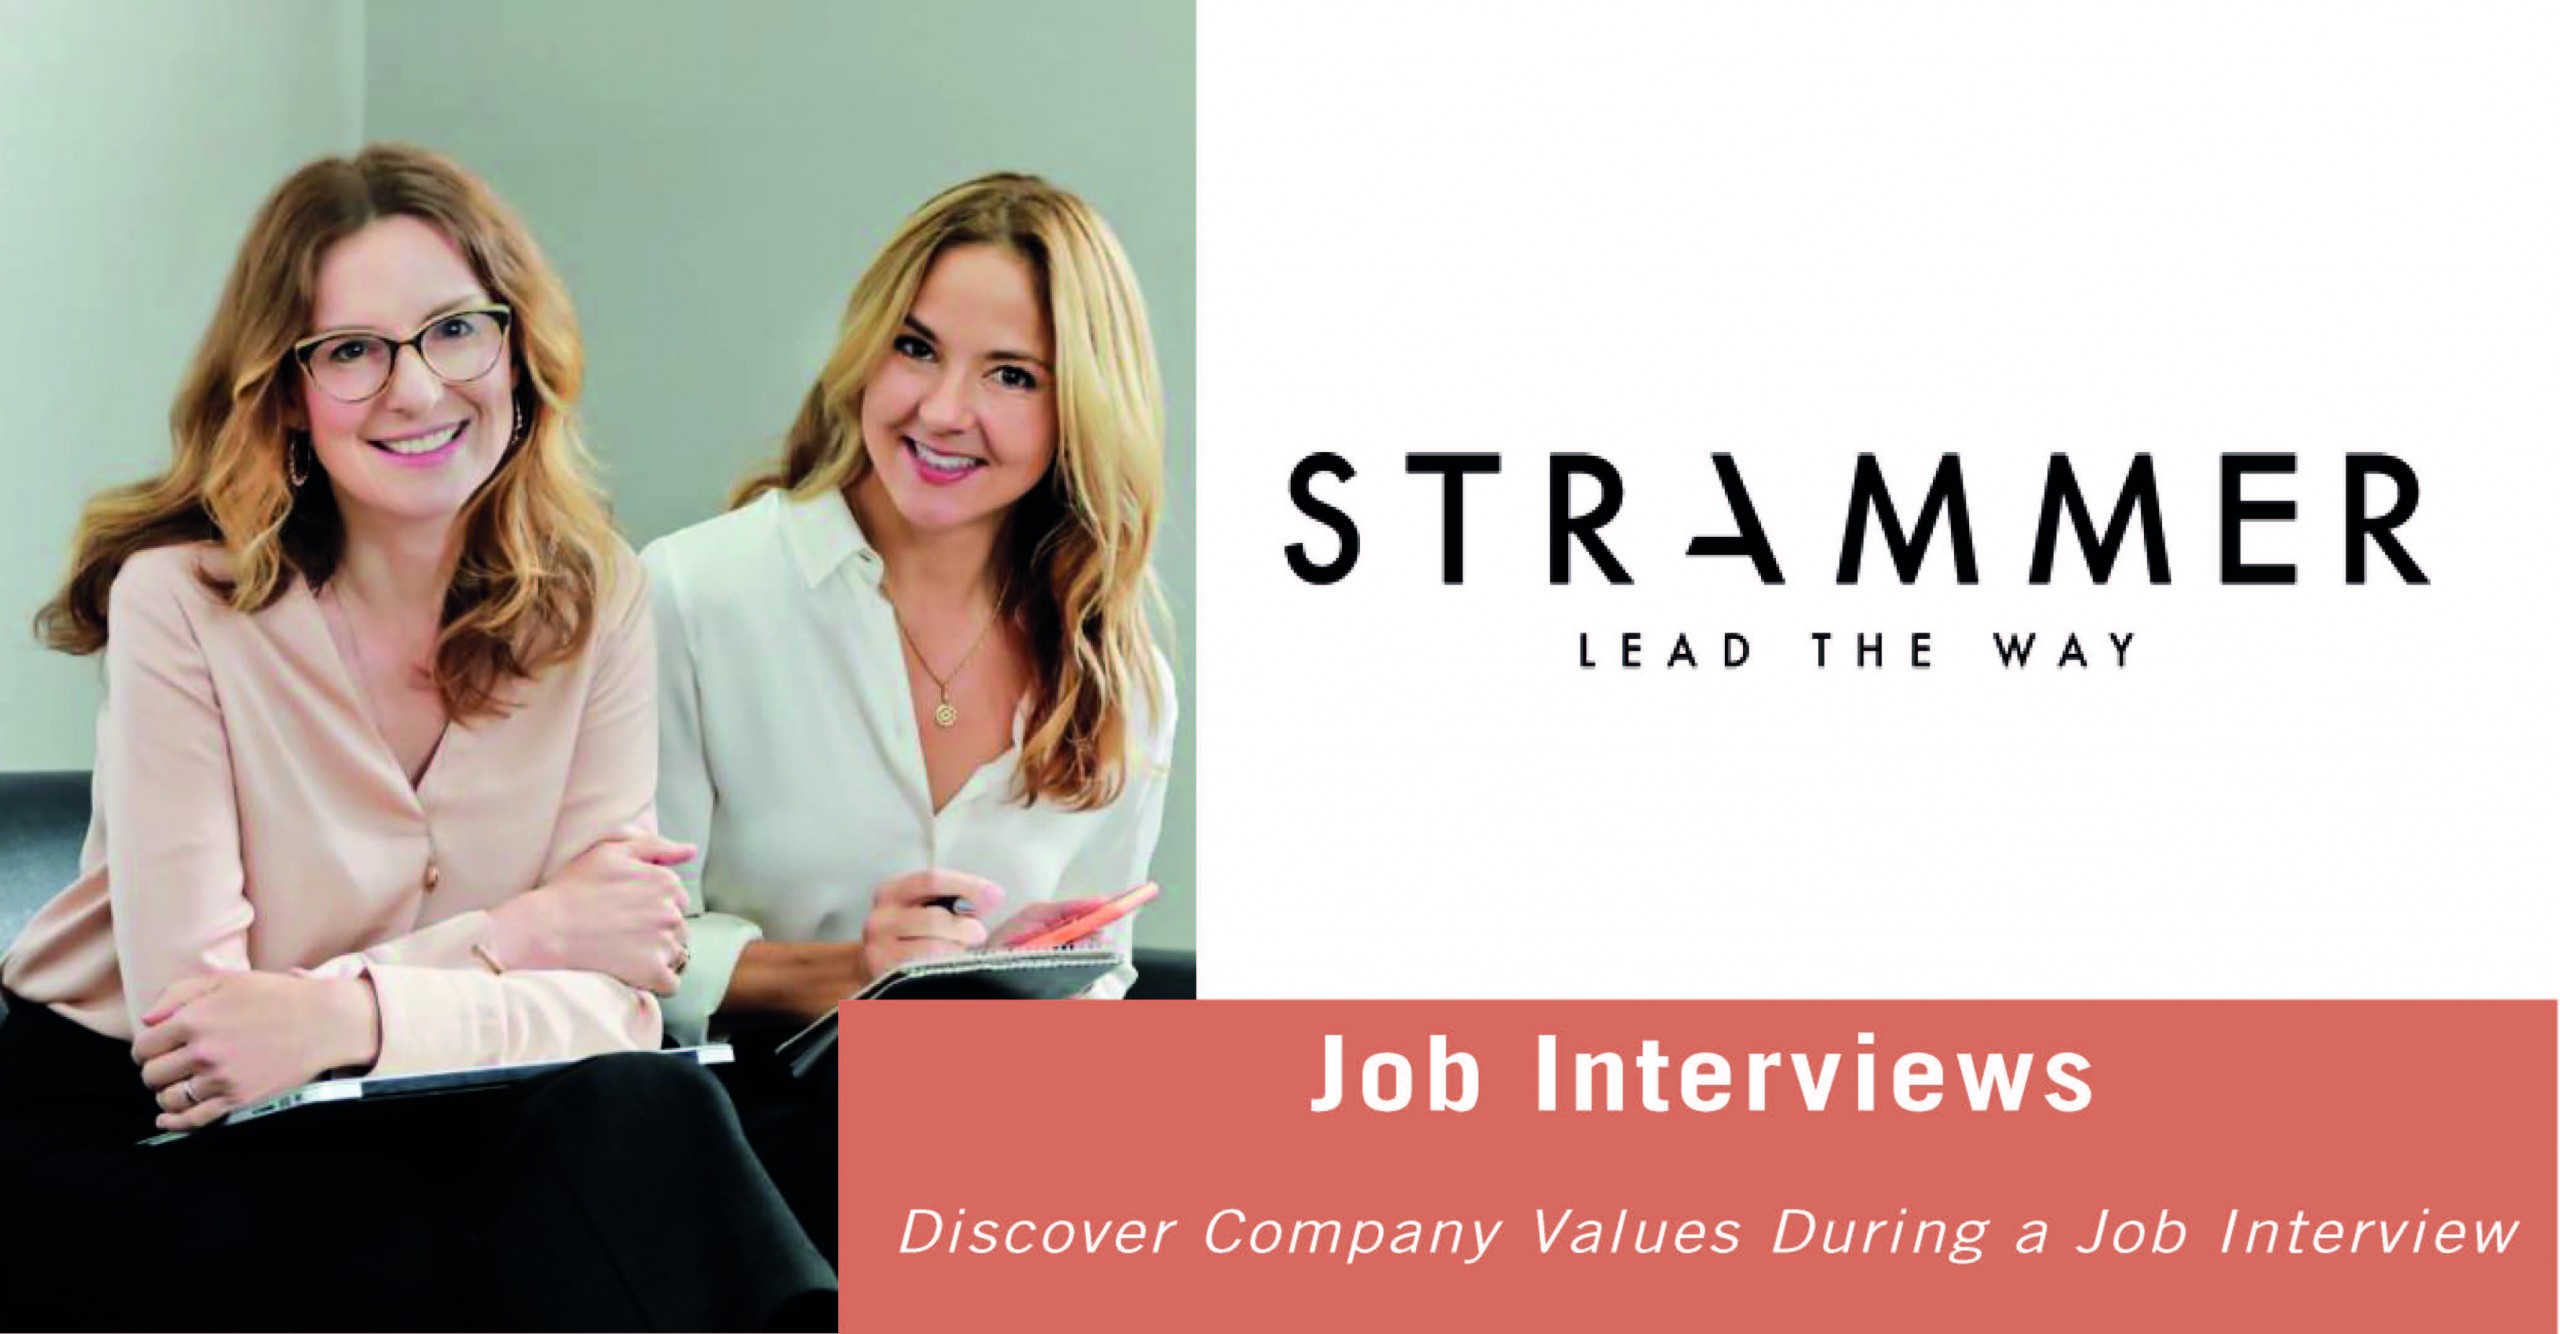 Discover Company Values During a Job Interview